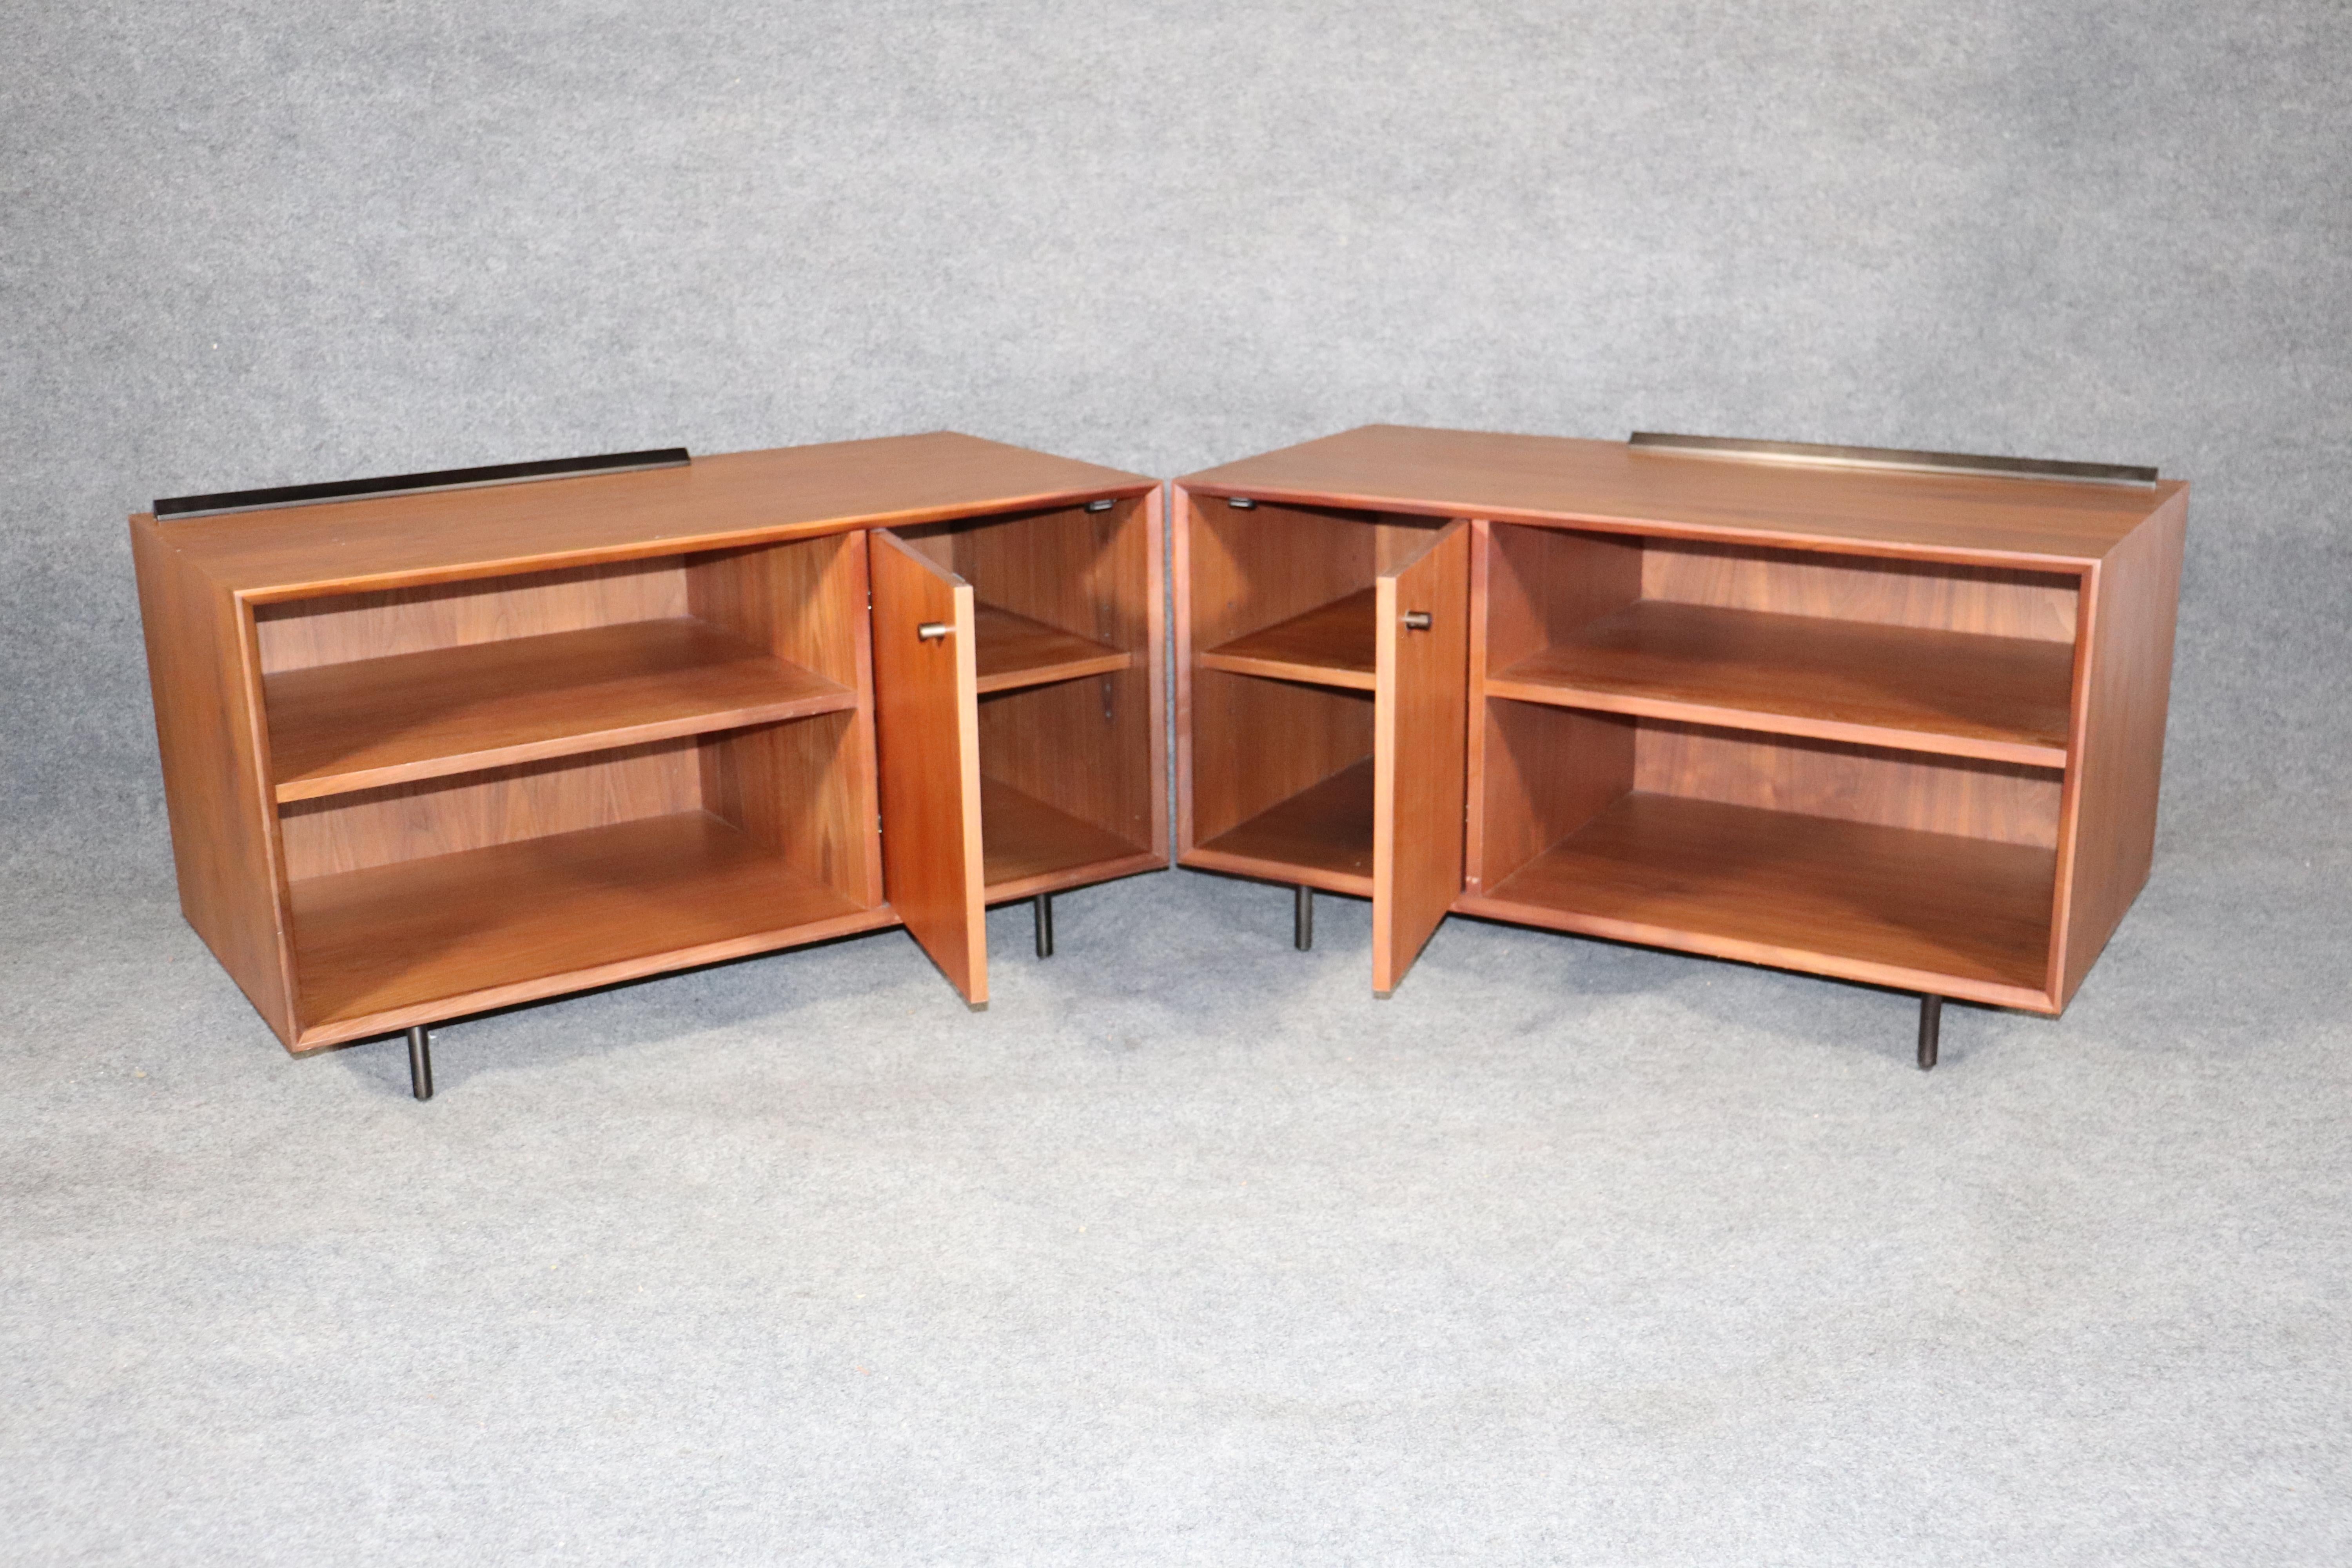 Pair of mid-century office cabinets in teak wood. Great for modern home or office storage.
Please confirm location NY or NJ.